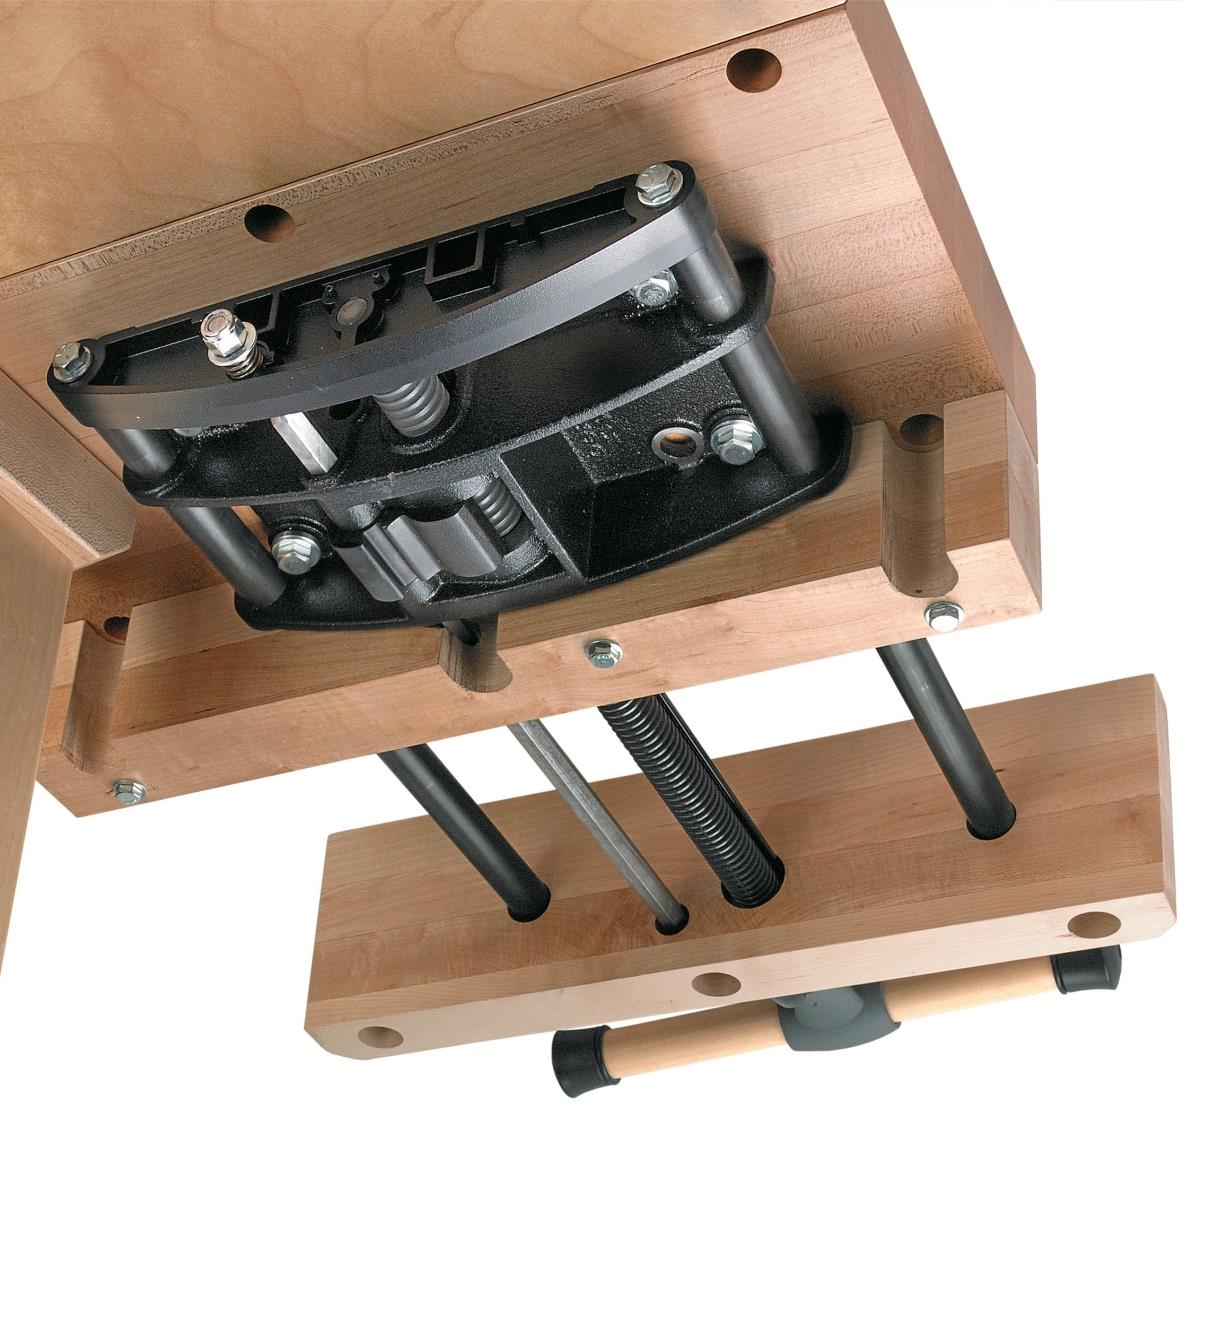 Underside view of vise installed in a workbench